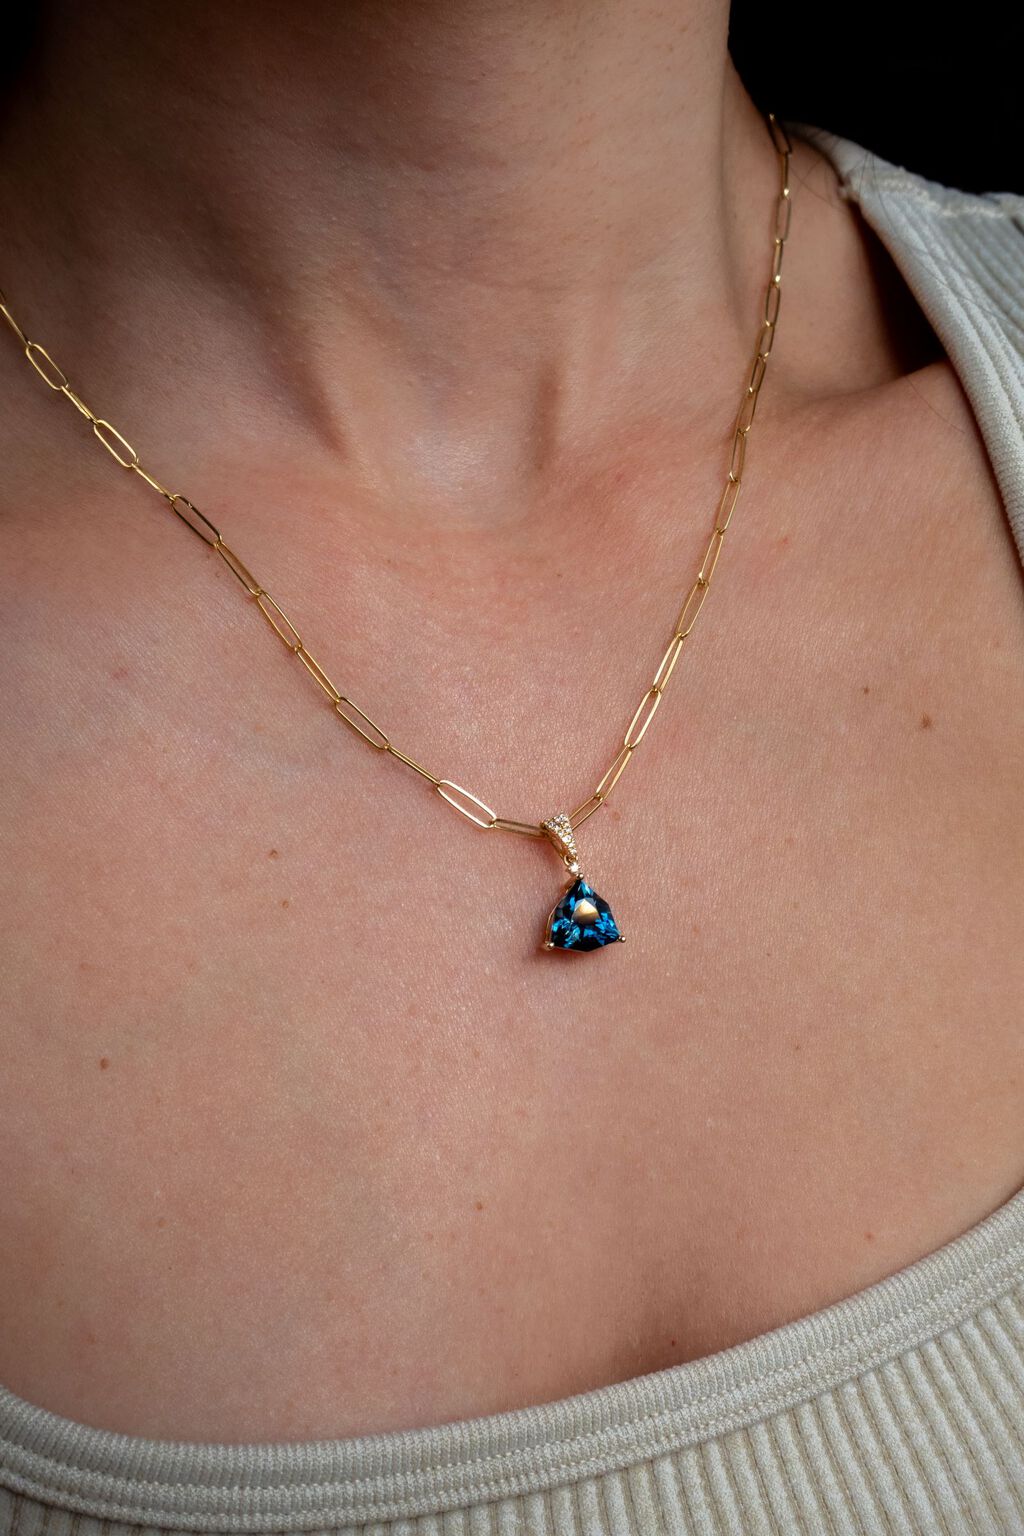  Woman wearing a beautiful blue gemstone pendant on a paperclip chain